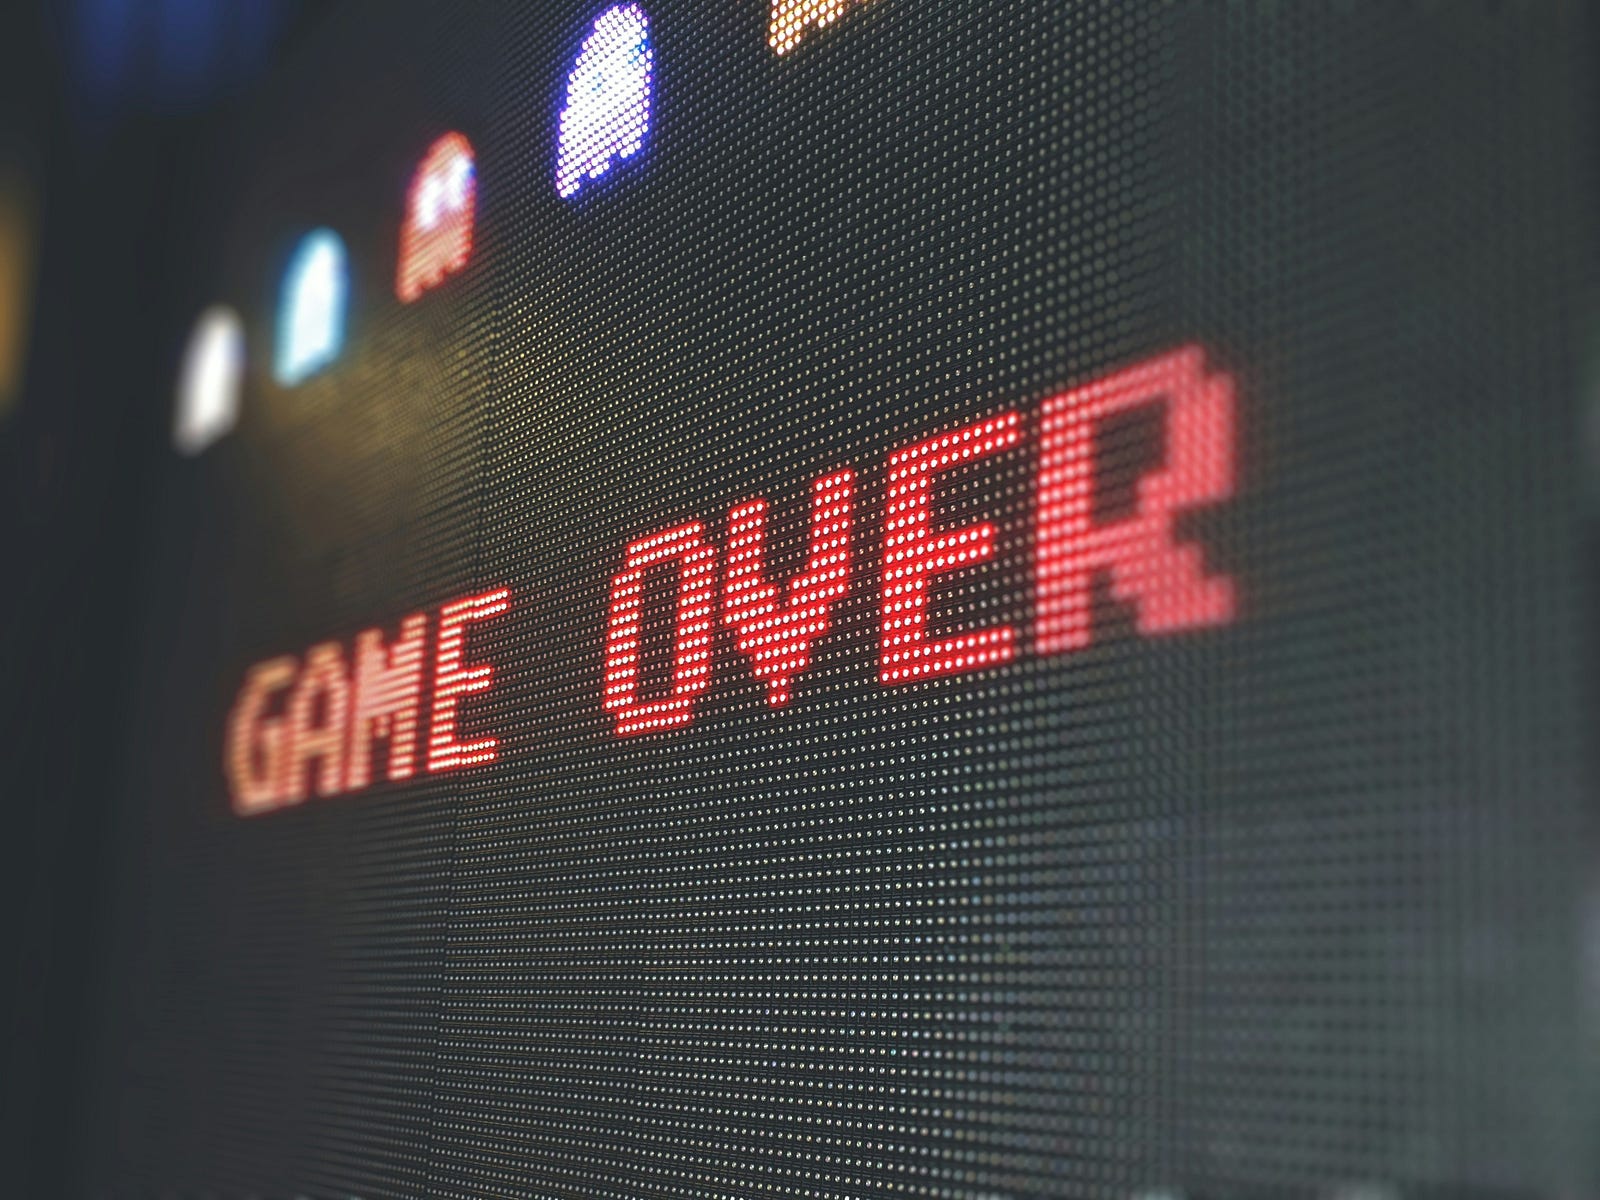 A PacMan screen reads “GAME OVER” in red letters.